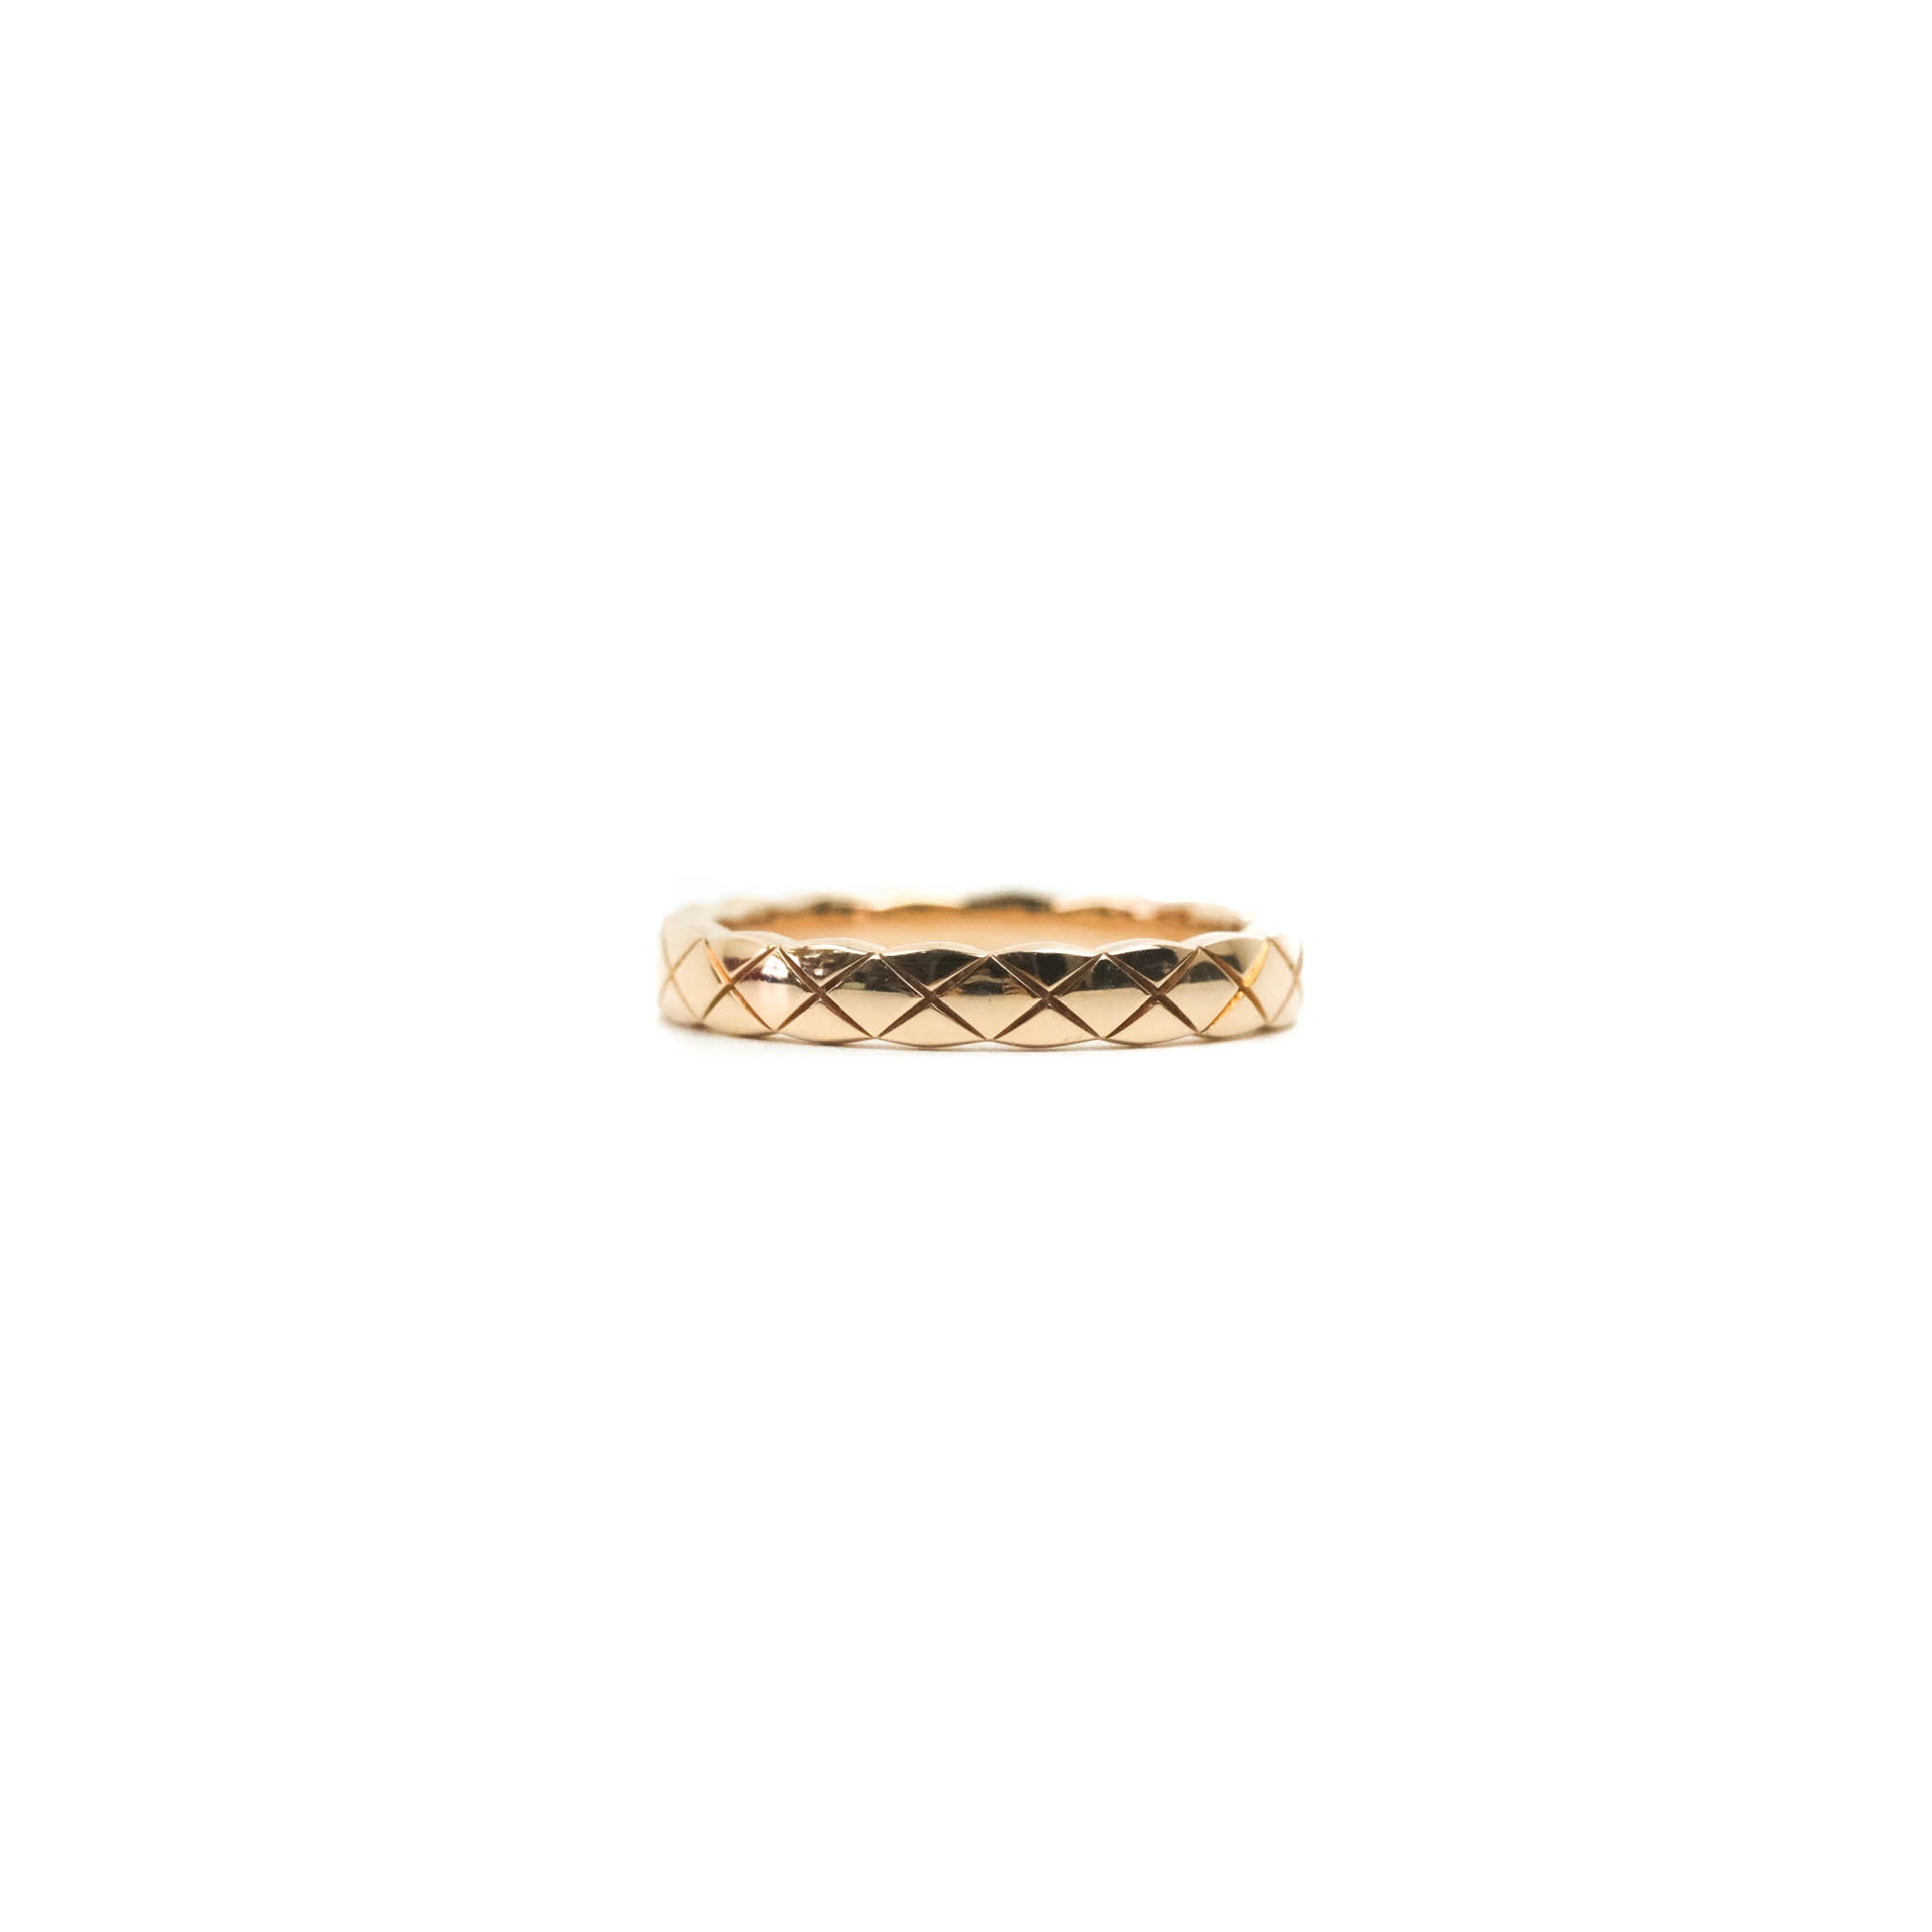 Chanel Coco Crush Ring 18K Beige Gold Size 52 – Coco Approved Studio